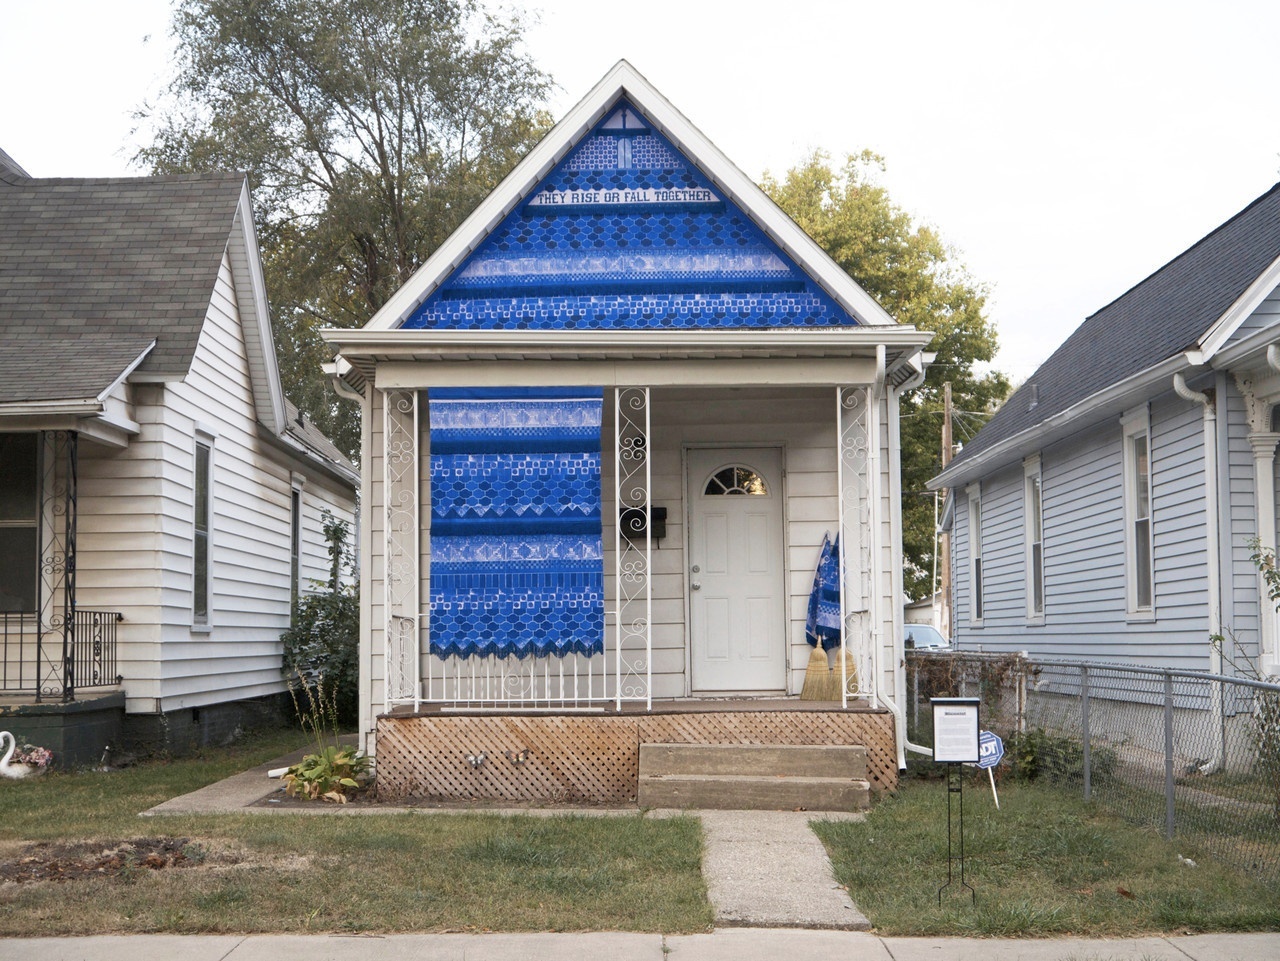 Site-specific artwork installation on the triangular roofline front plus one window area of an old house. The installation is made of a bright blue patterned fabric; at the top of the triangular portion, it says "They Rise of Fall Together."